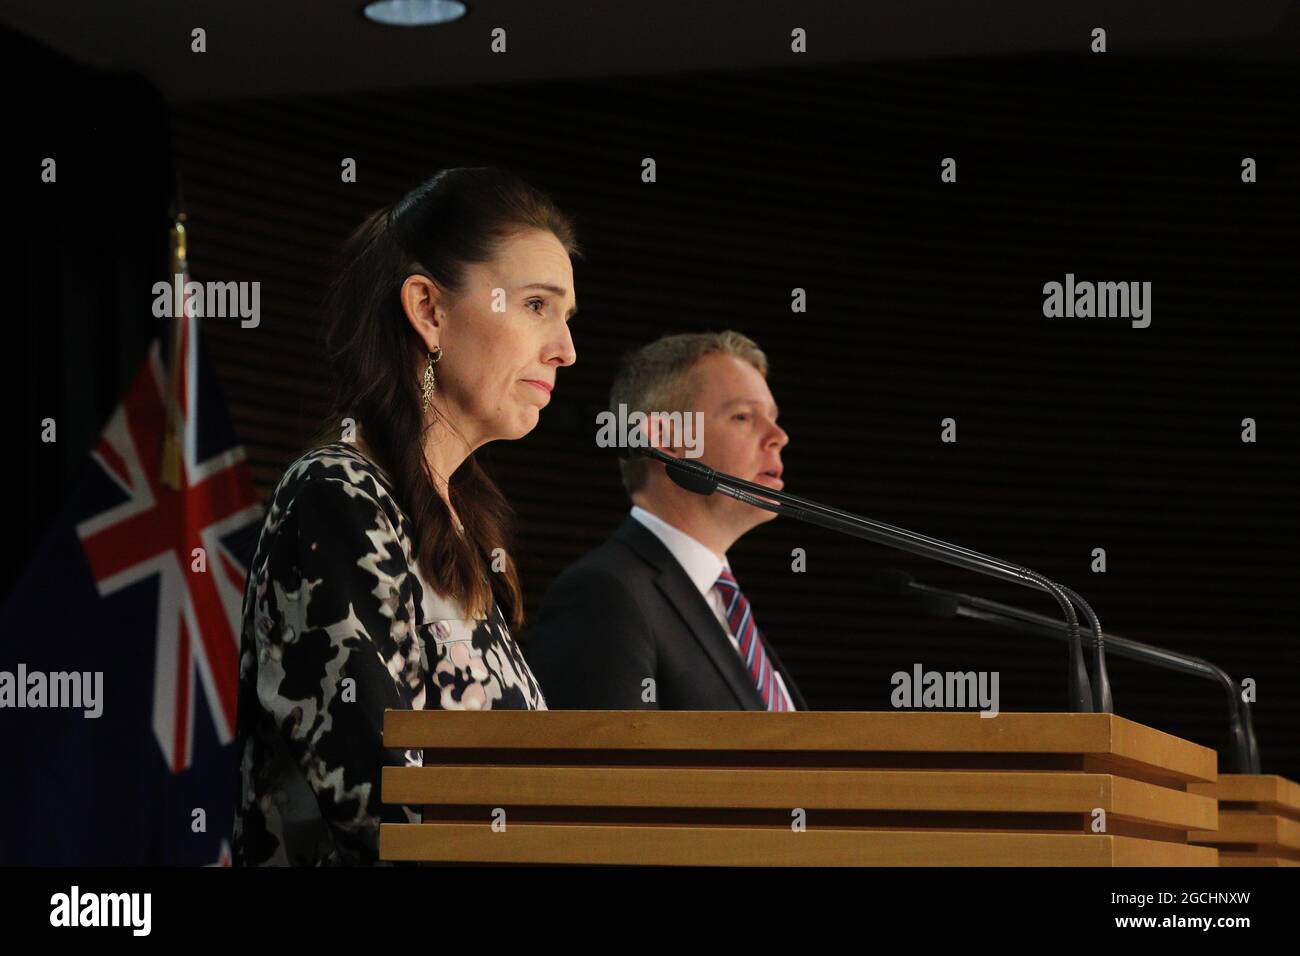 Wellington, New Zealand, 9 August 2021. New Zealand Prime Minister Jacinda Ardern and Covid Response Minister Chris Hipkins (right) hold a press conference to discuss the exposure of unvaccinated port workers to crew infected with Covid-19 on board the Maersk cargo ship Rio de la Plata. Ardern expressed frustration over vaccine hesitancy related to online misinformation, and announced vaccination will be made mandatory for frontline port workers. Credit: Lynn Grieveson/Alamy Live News Stock Photo